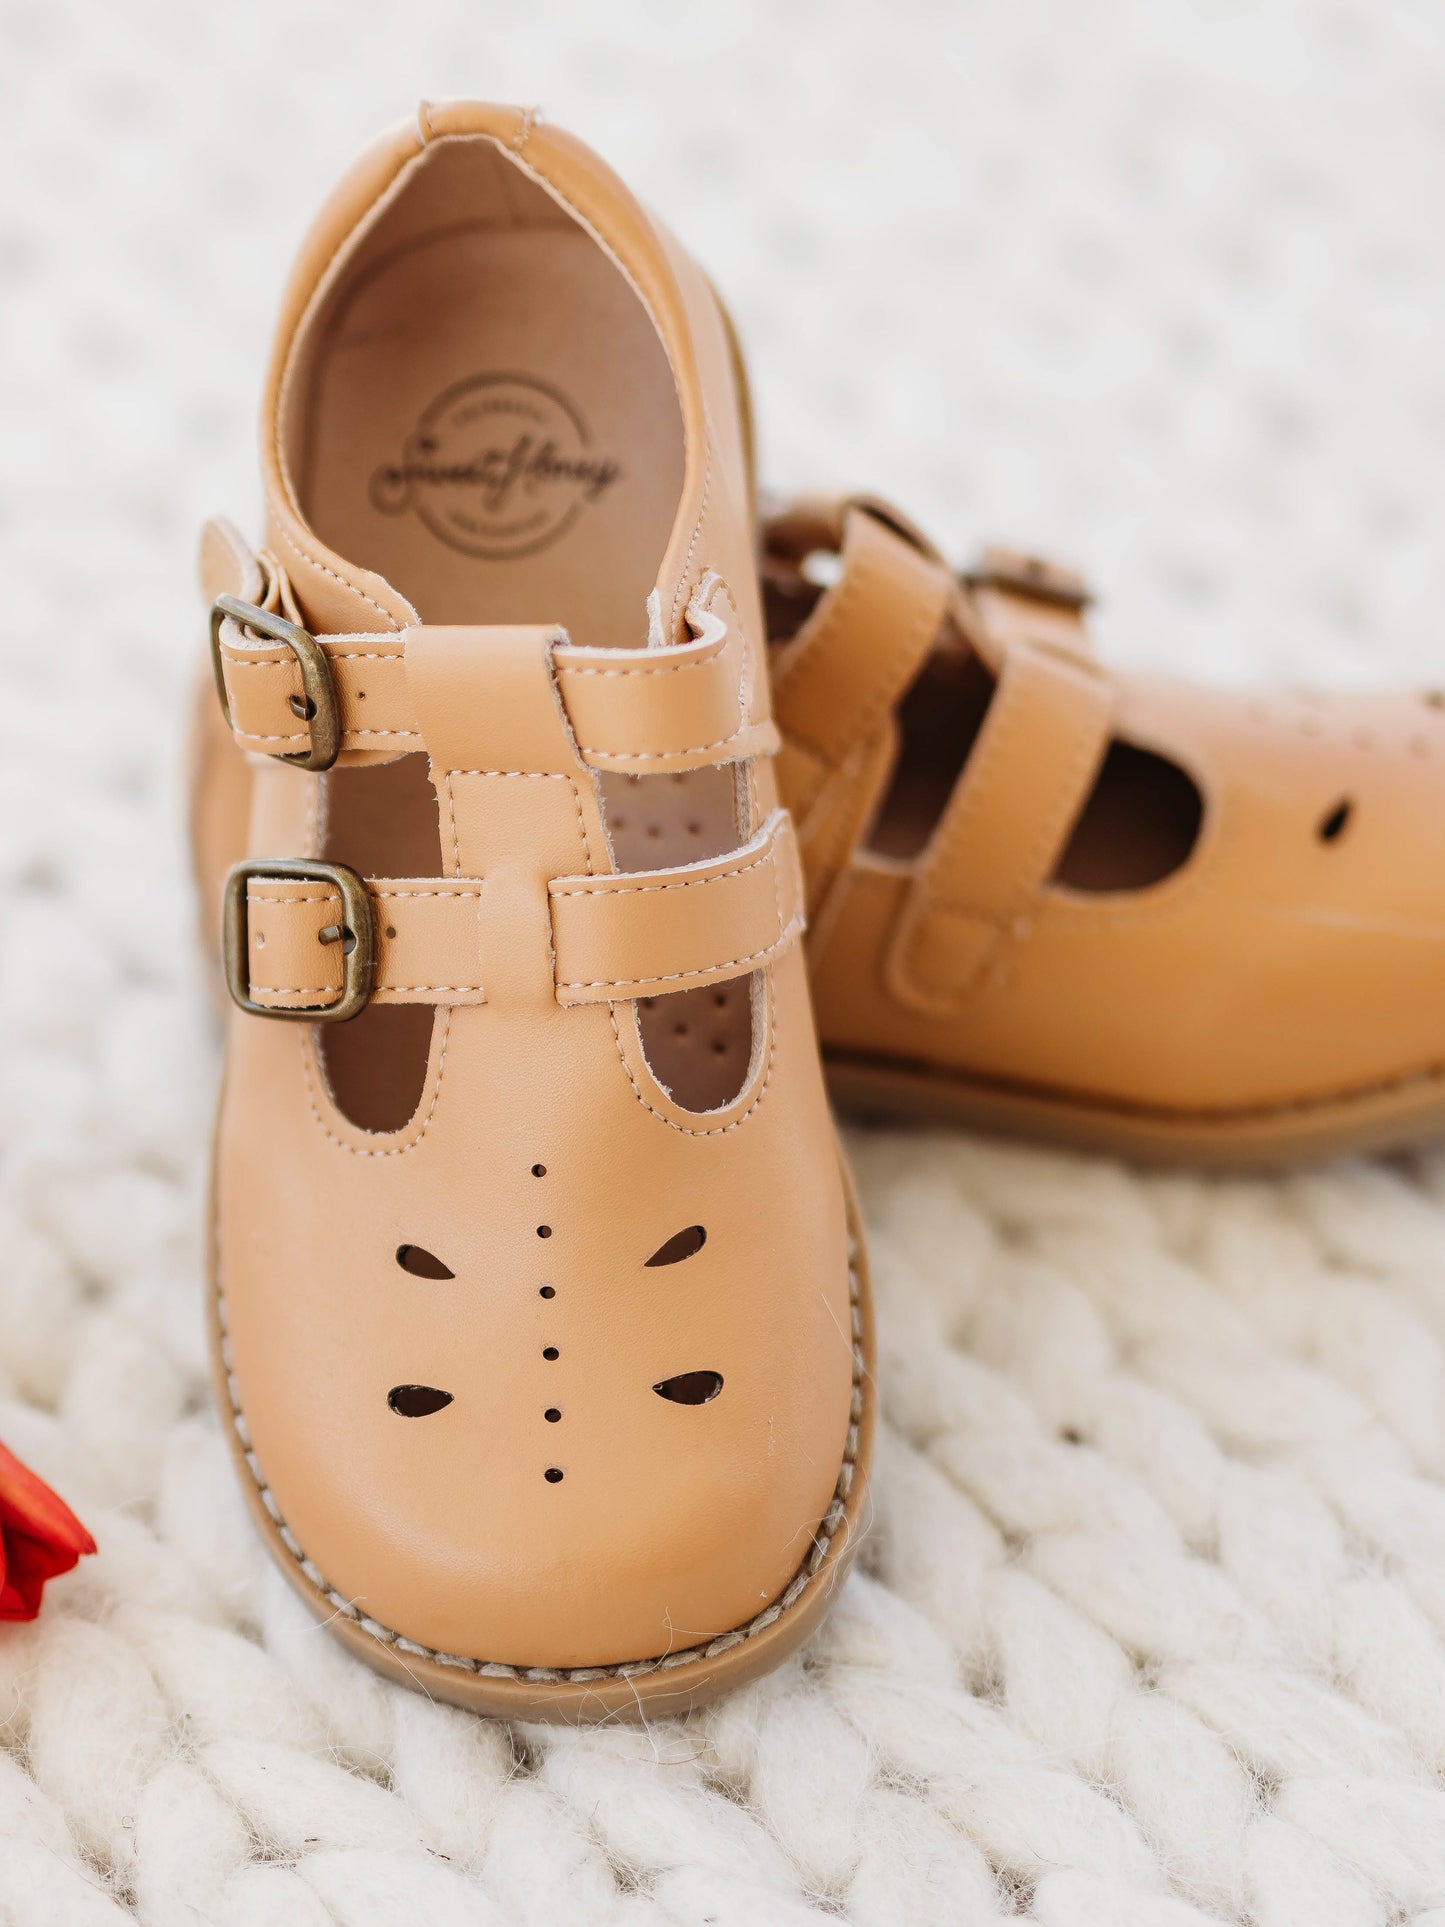 A pair of tan colored genuine leather rubber soled shoes with two adjustable metal buckles and cut out detail across the toe area in a dragonfly type pattern. 